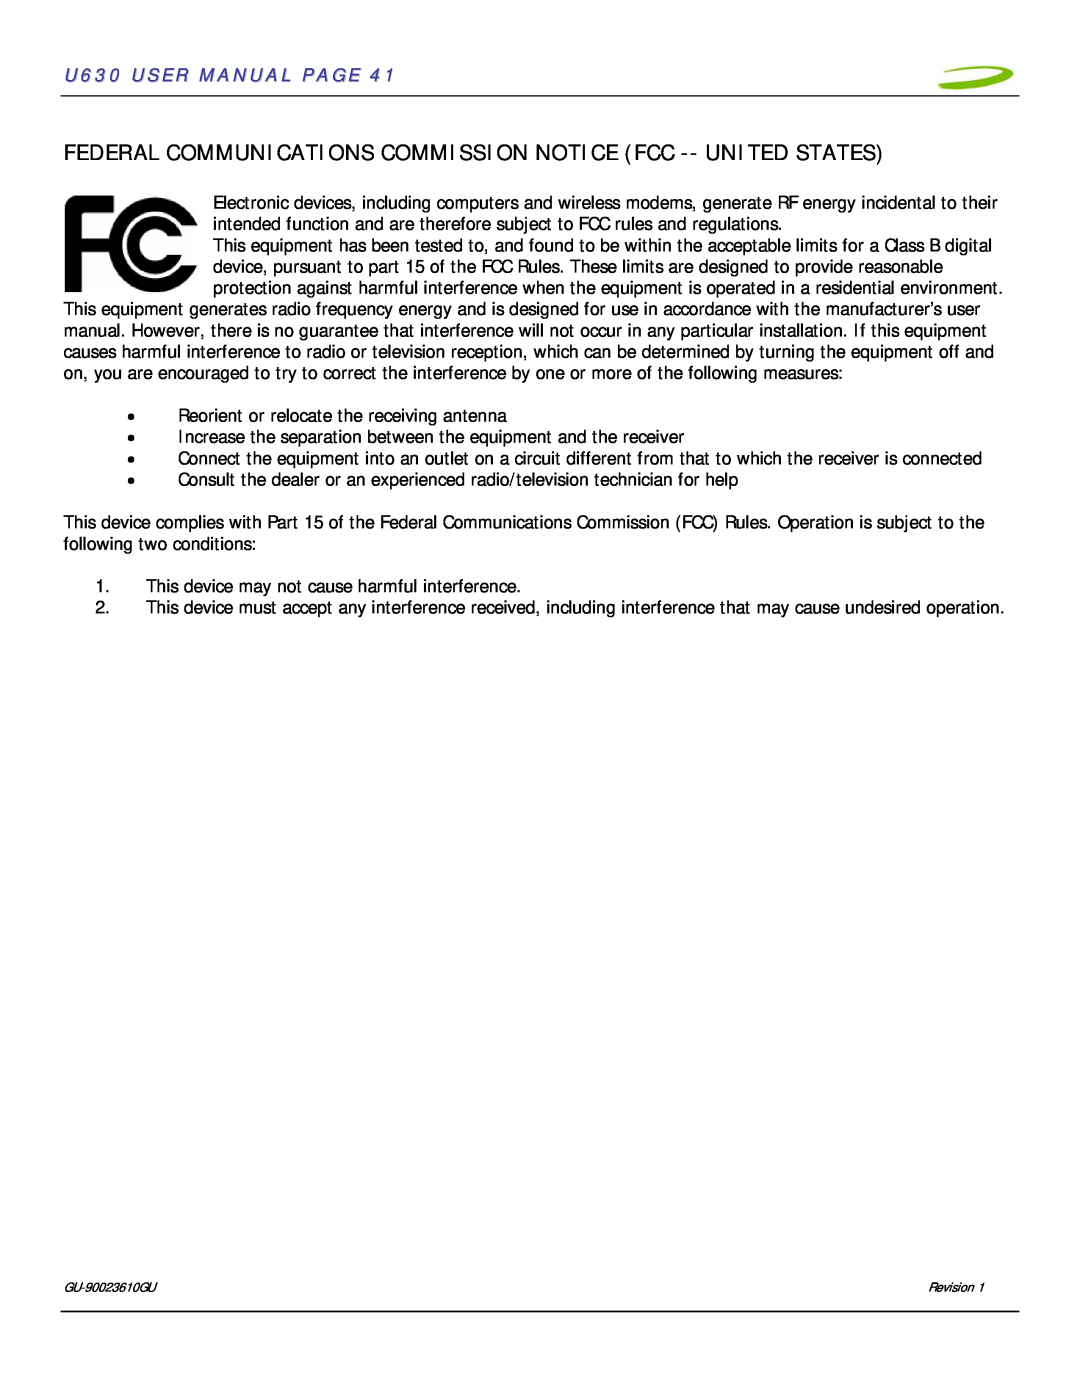 InFocus user manual Federal Communications Commission Notice Fcc -- United States, U630 USER MANUAL PAGE 